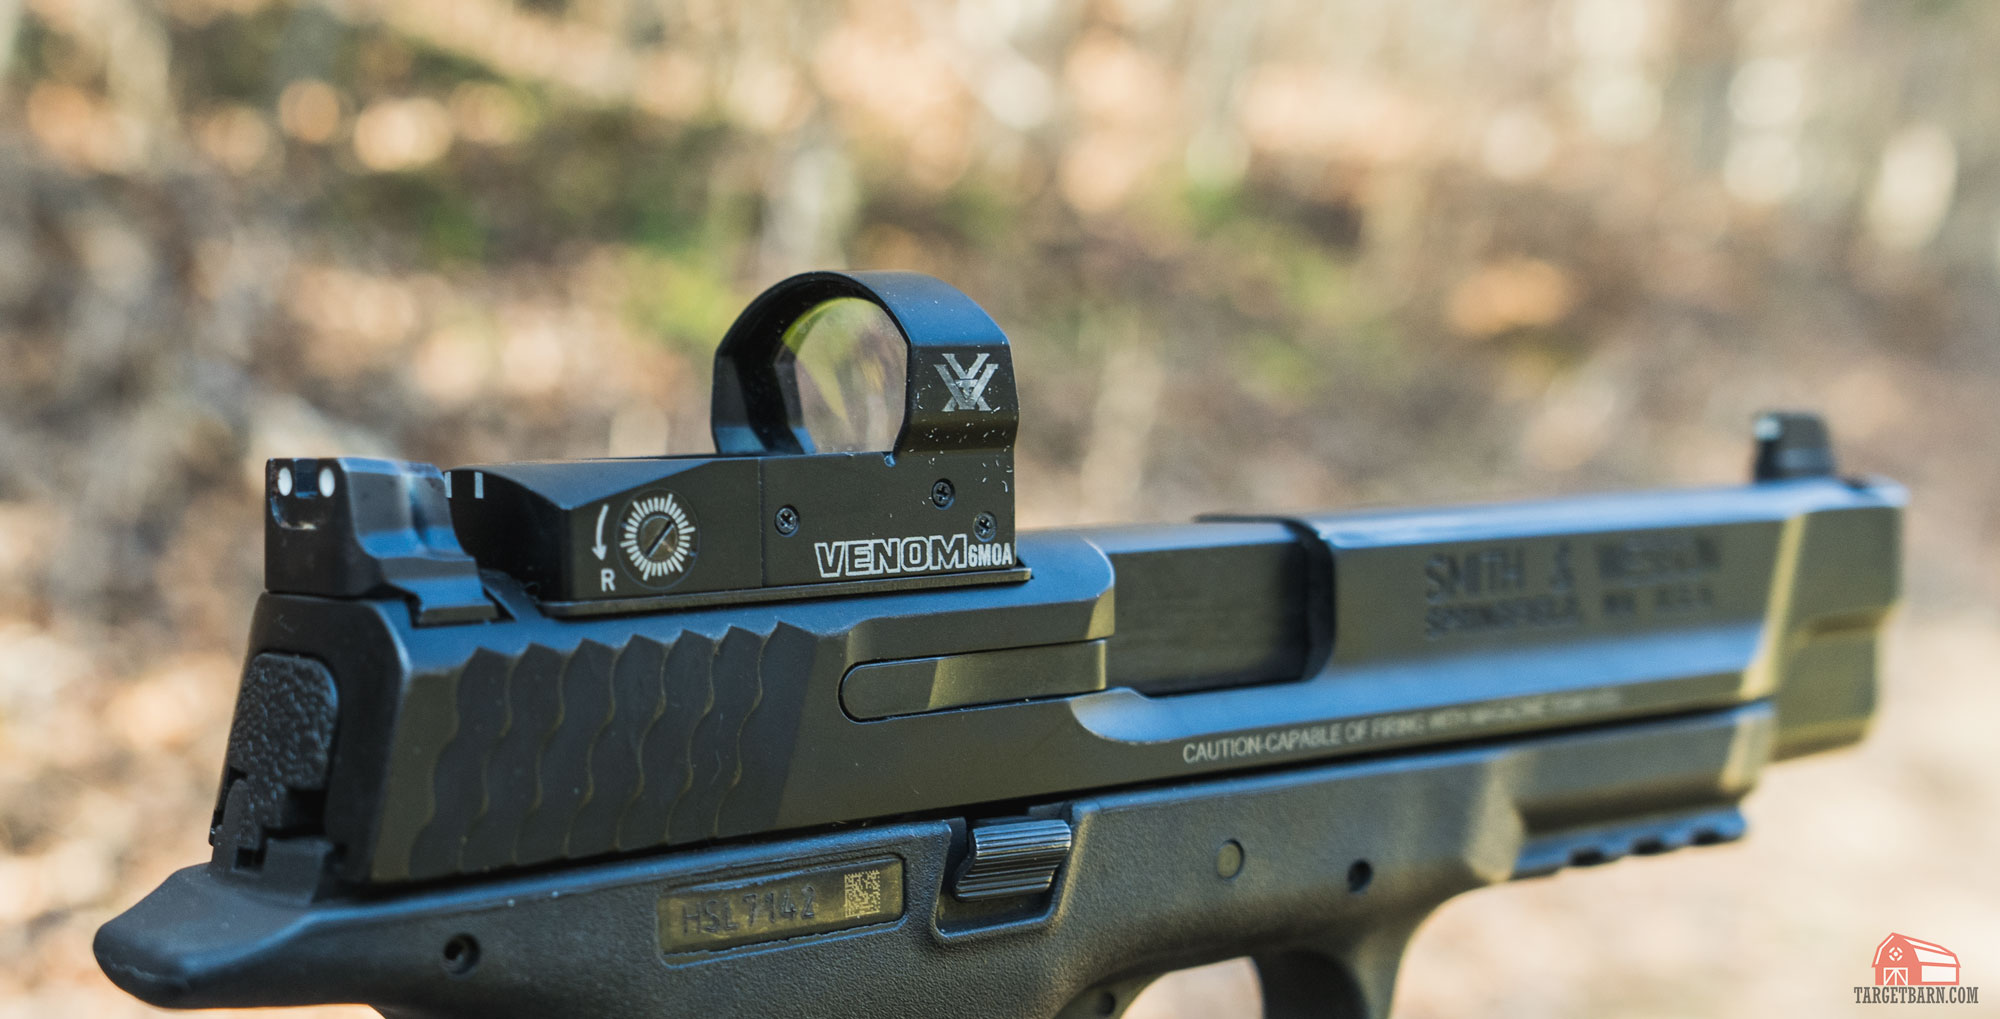 a vorrtex venom red dot optic mounted on a smith & wesson